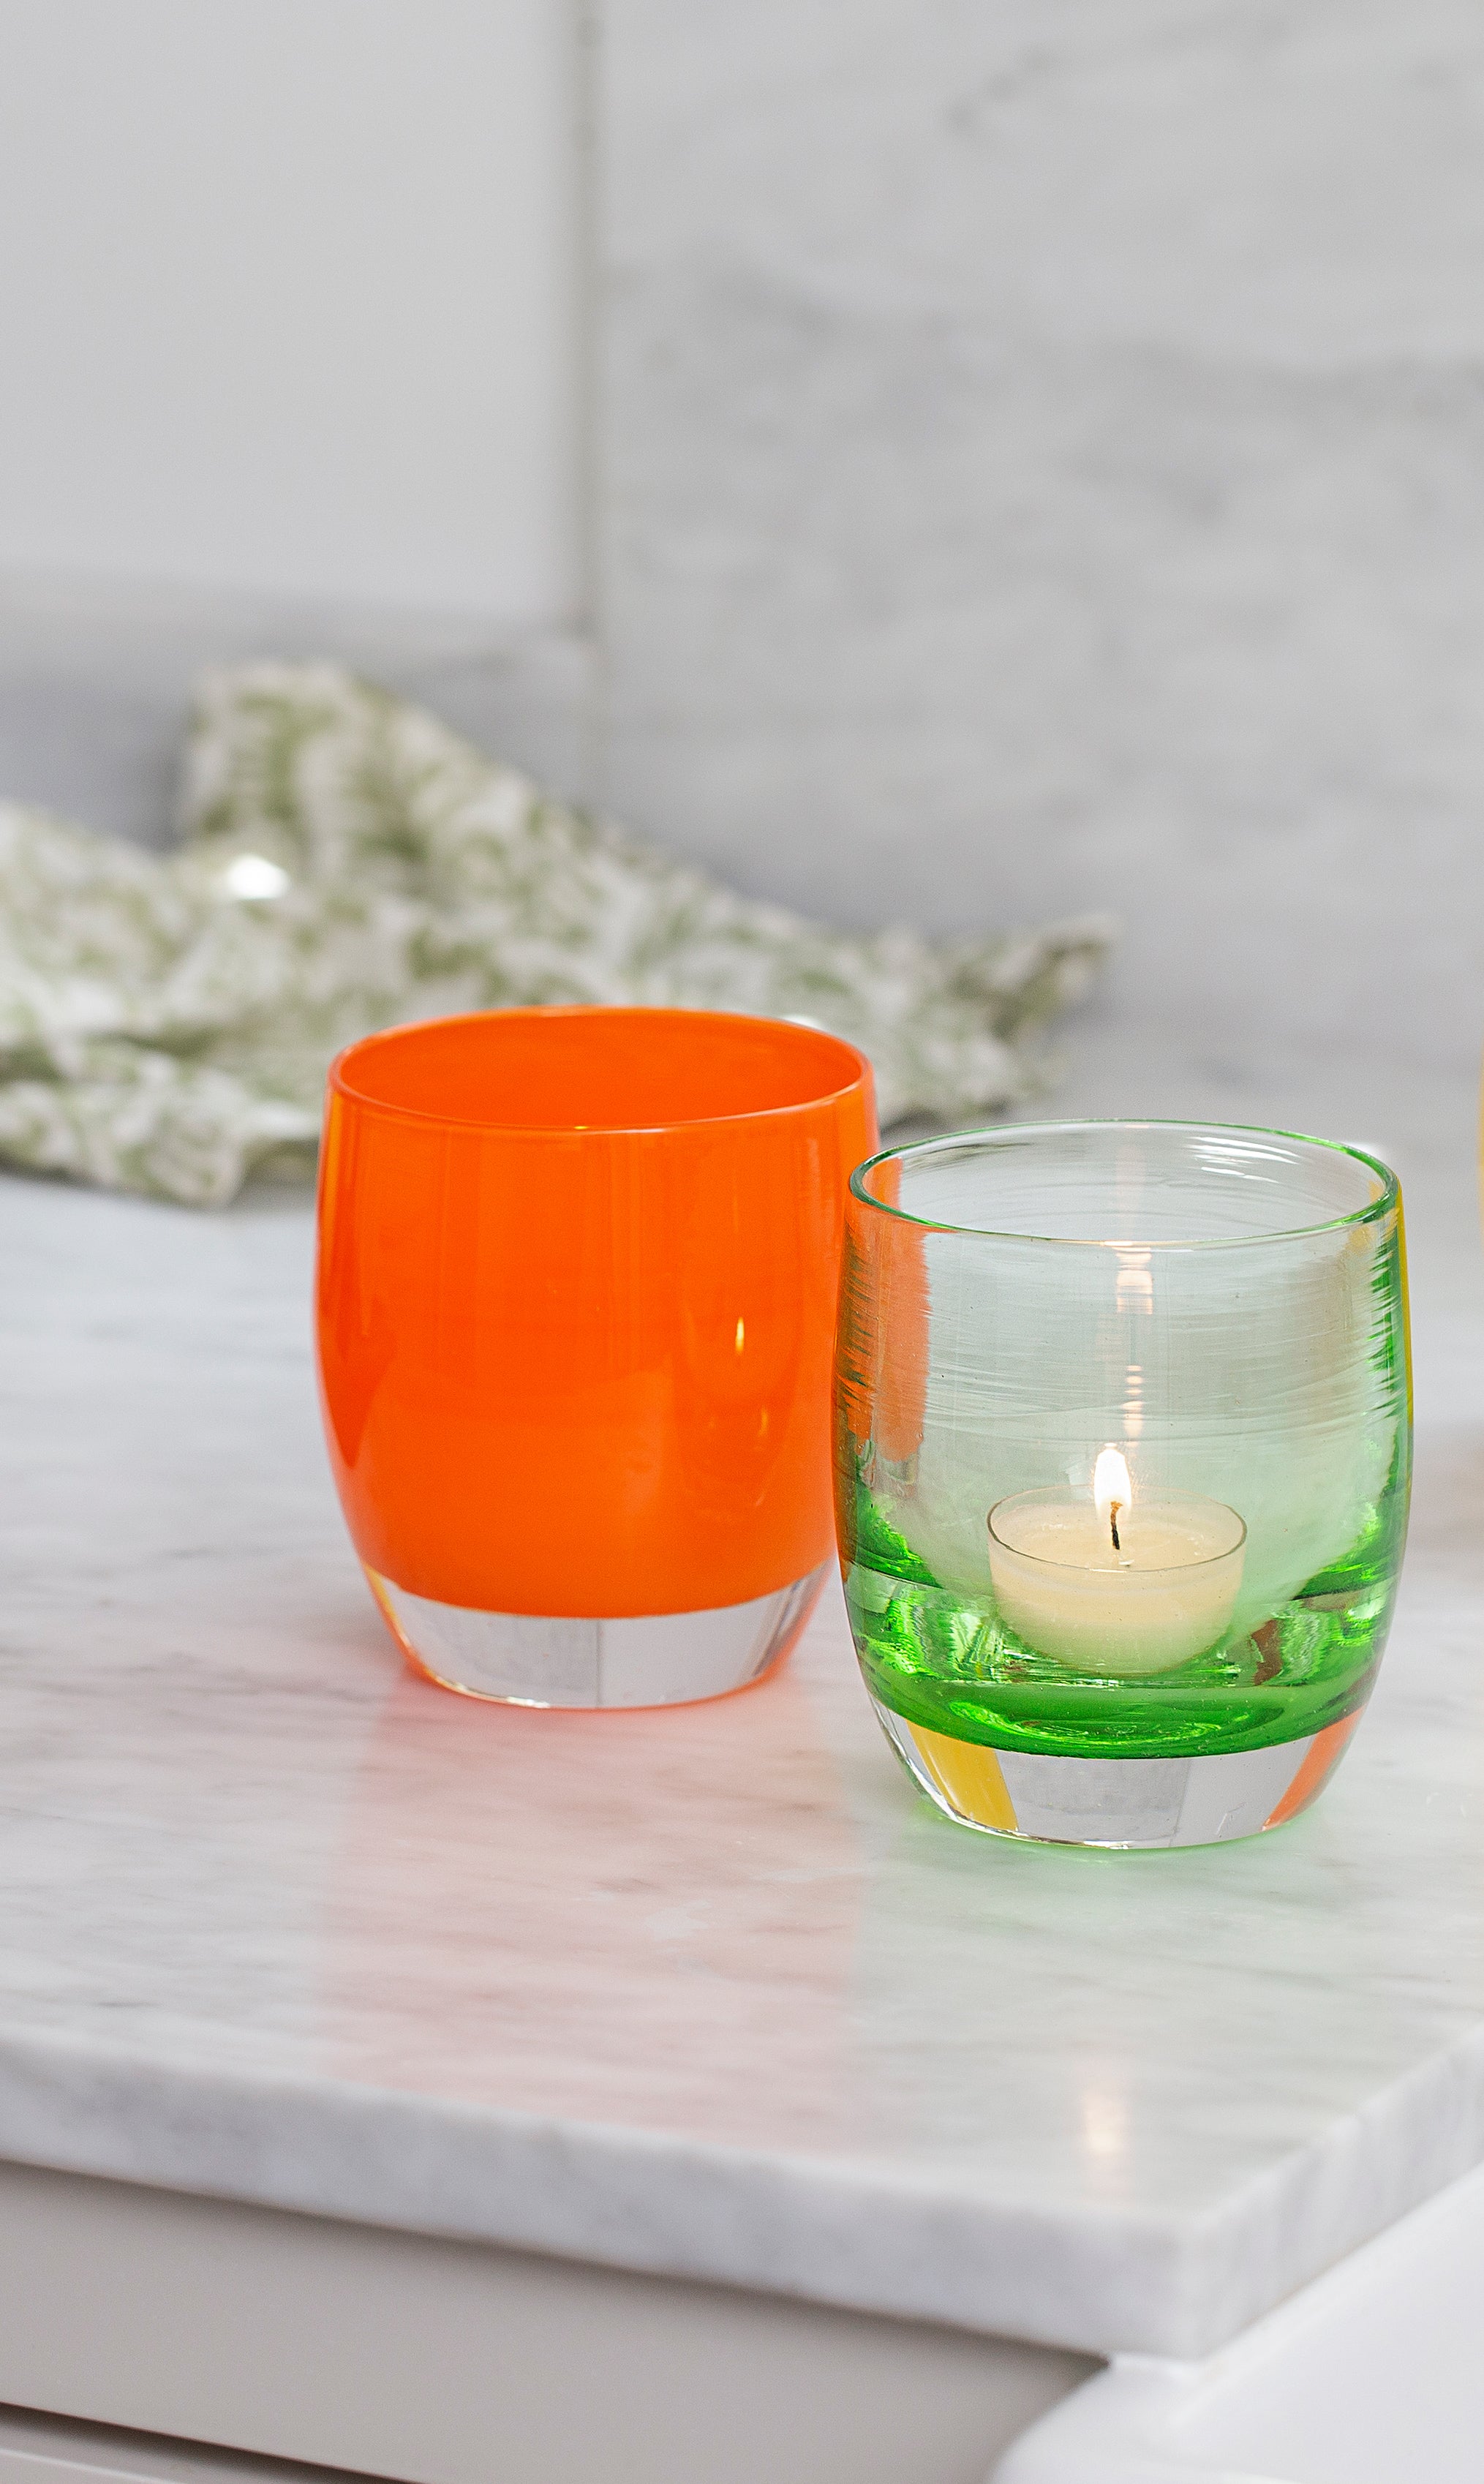 tangerine, bright orange hand crafted glass candle holder paired with clover, transparent green hand-blown glass candle holder on a marble table top.